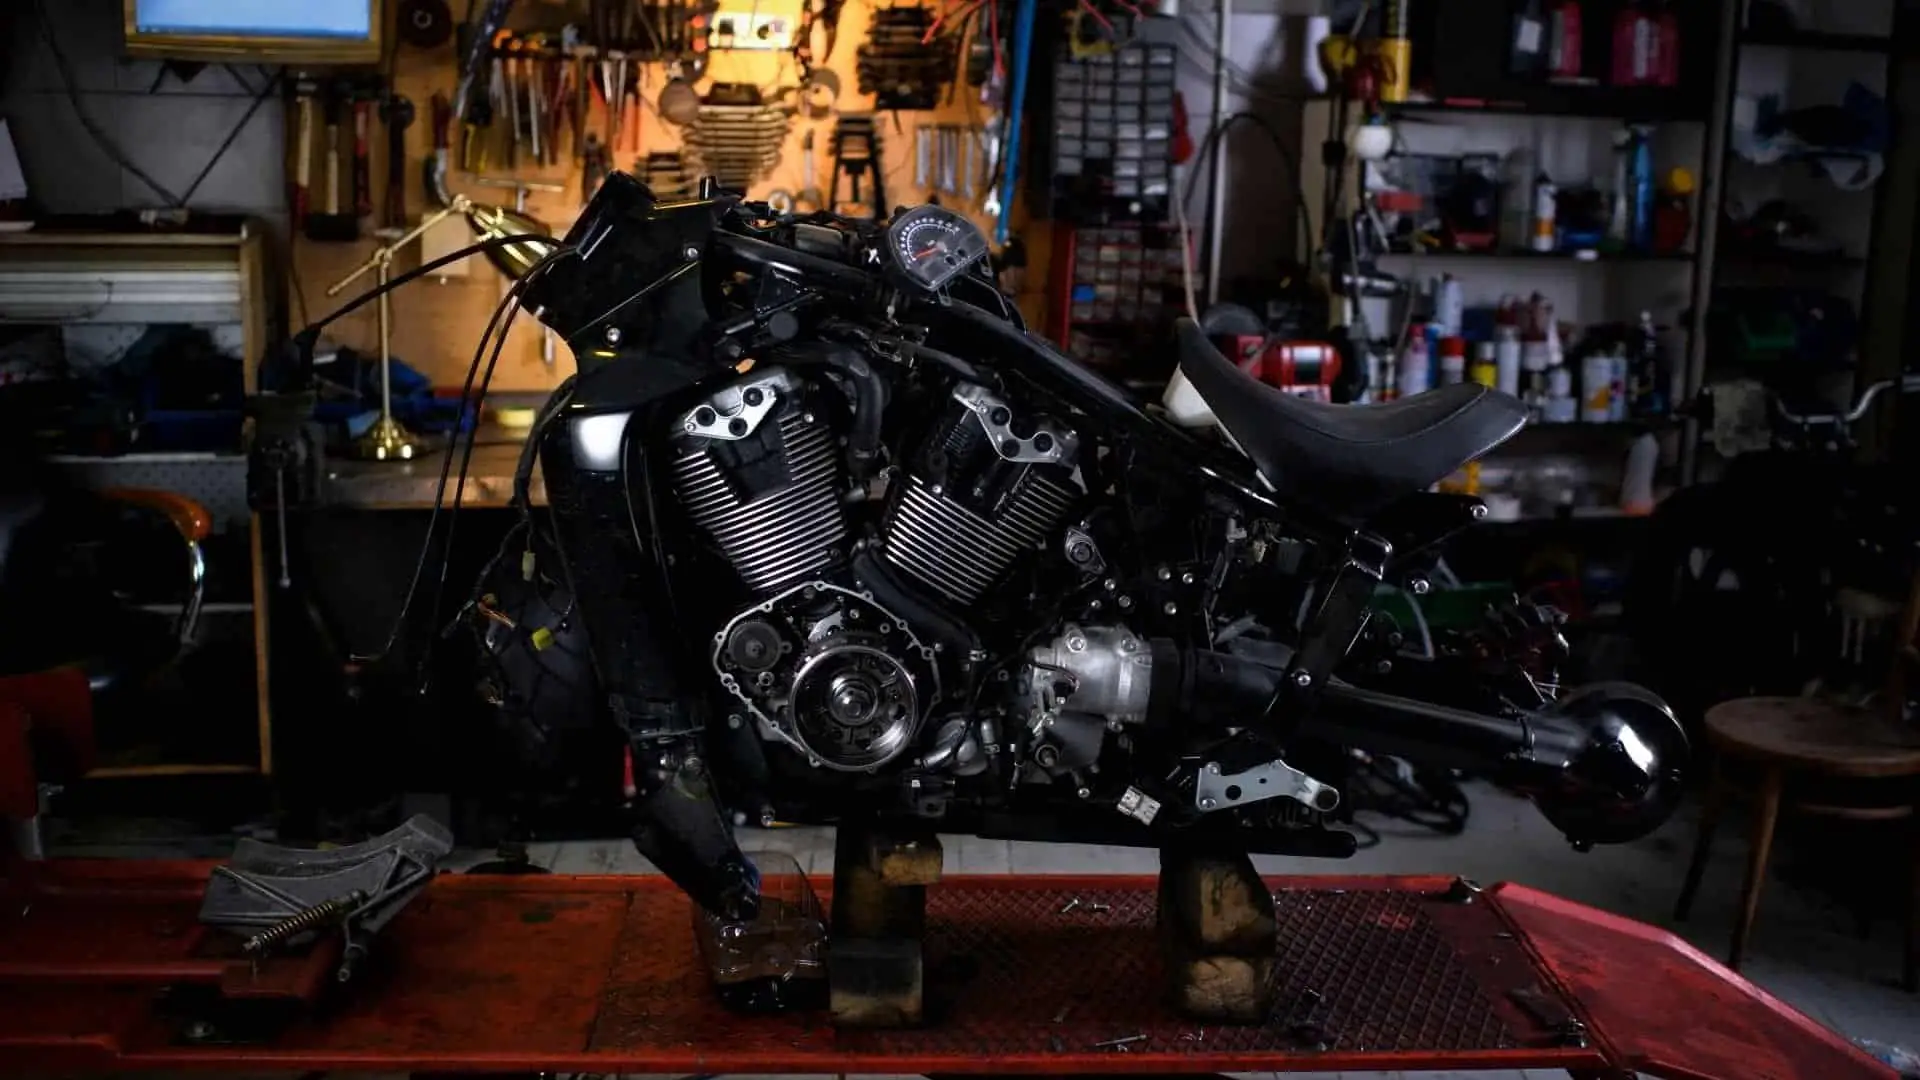 How To Paint A Motorcycle Engine?